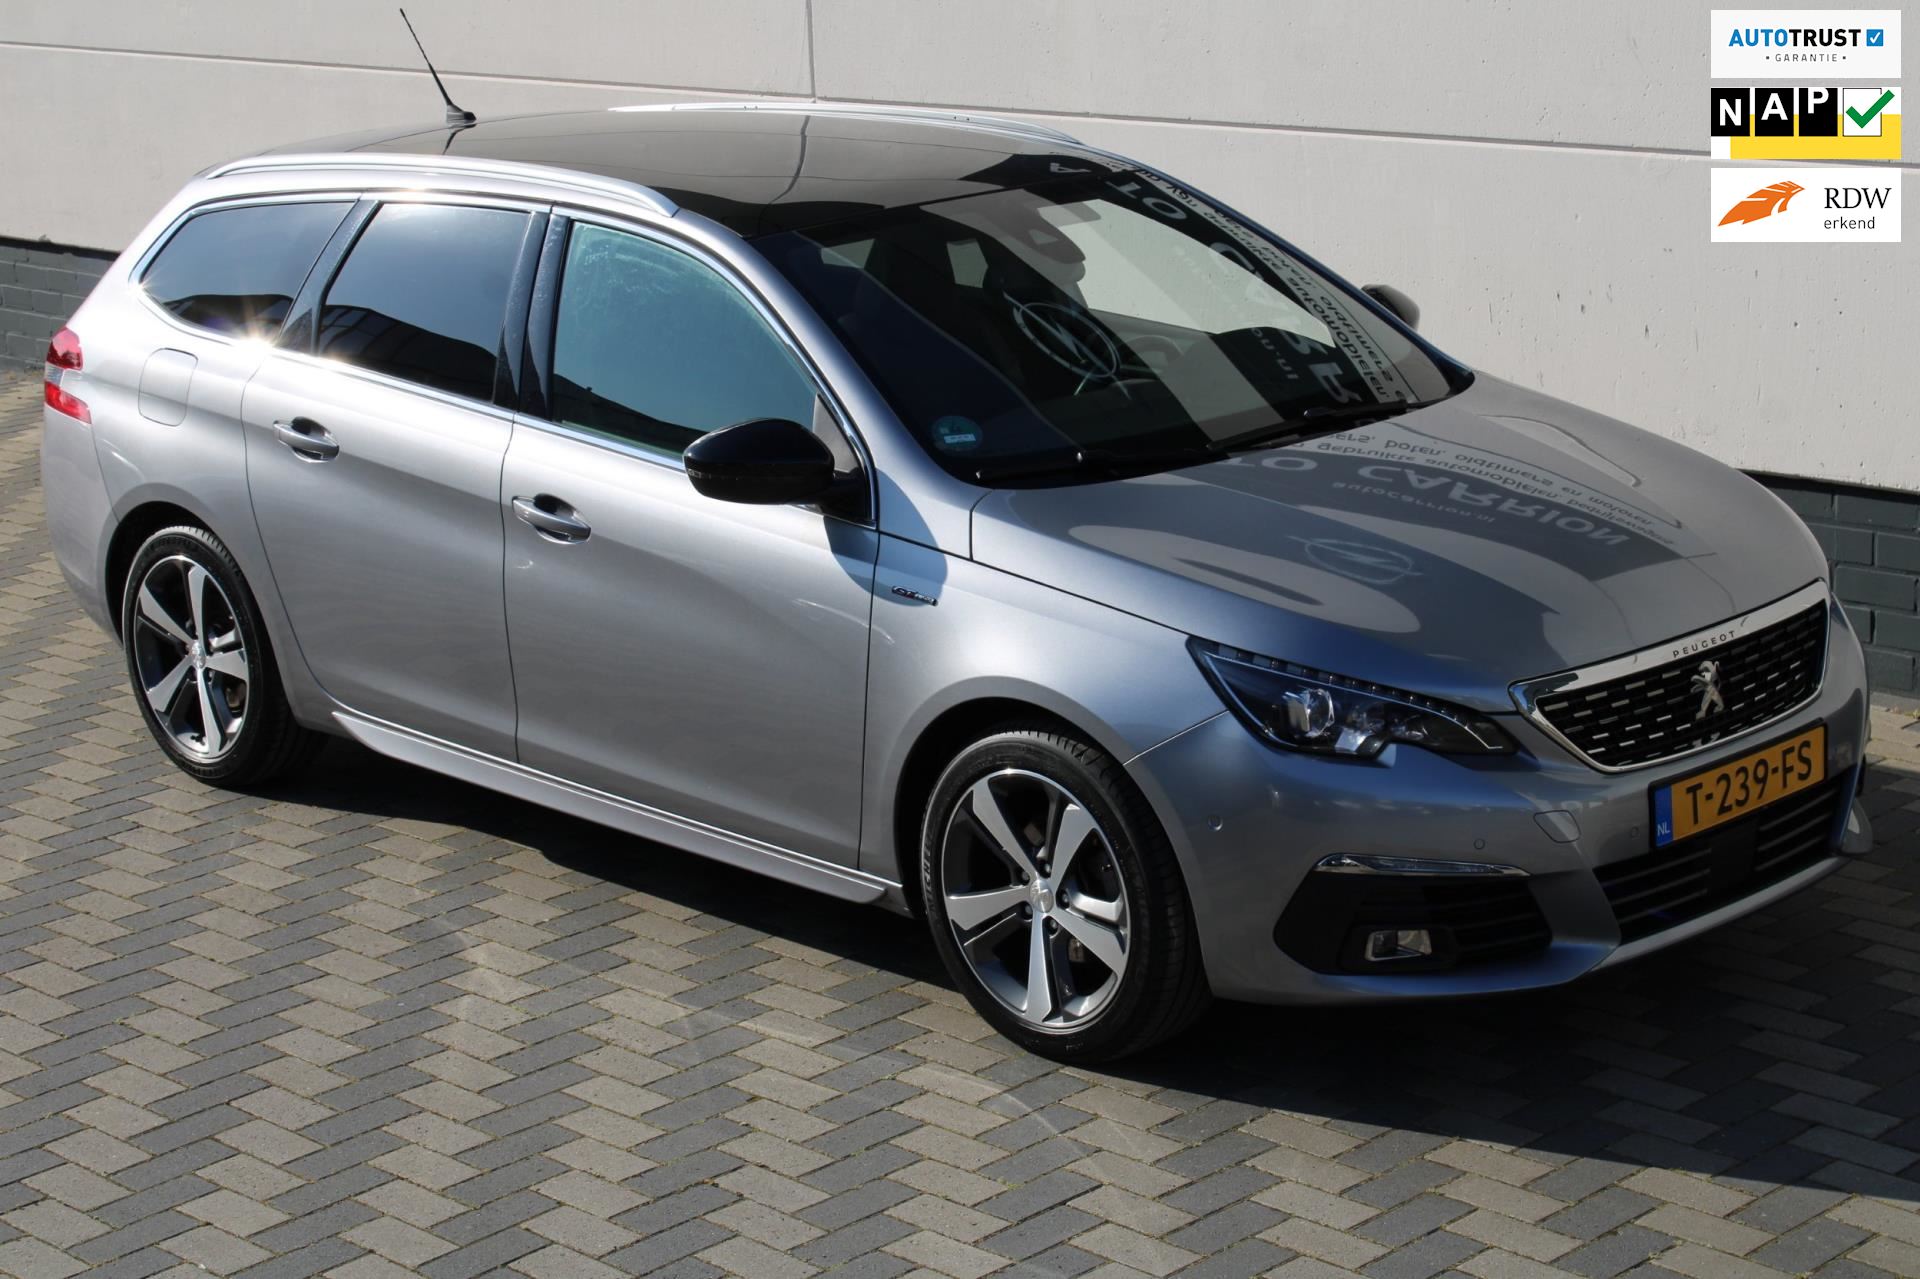 Peugeot 308 SW occasion - CARRION